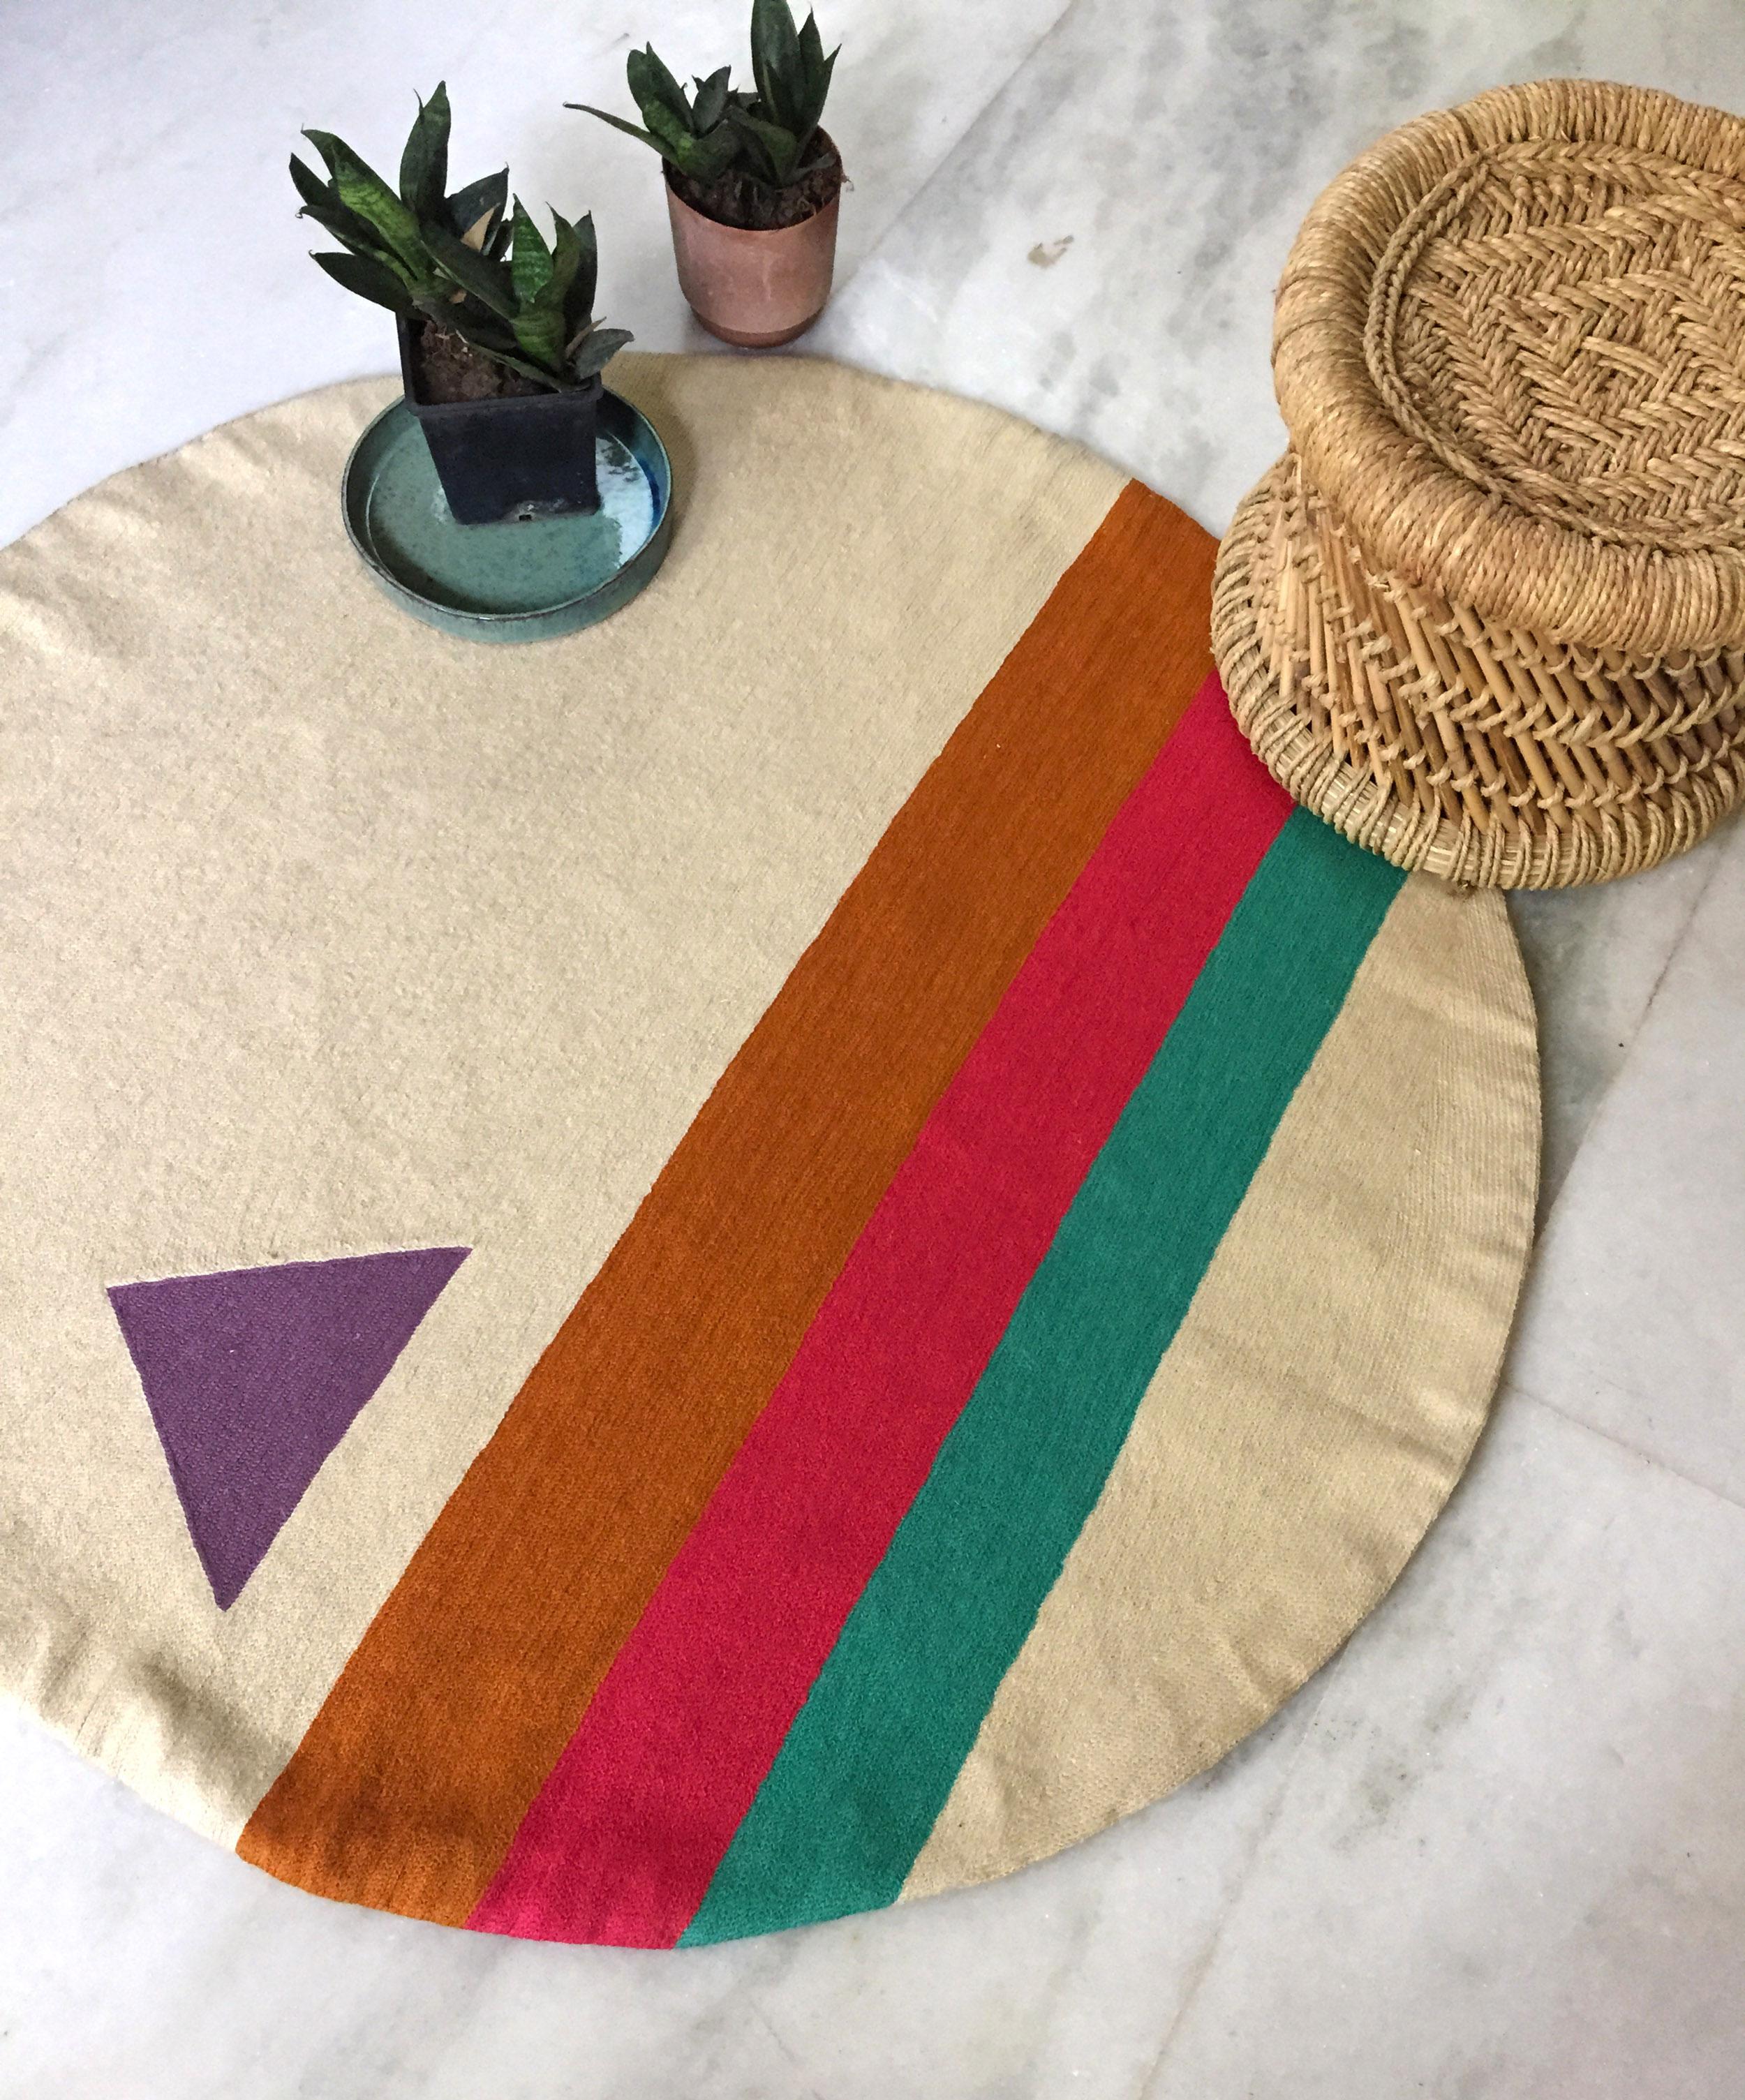 This modern round rug has been ethically hand embroidered by artisans in Kashmir, India, using a traditional embroidery technique which is native to this region.

The purchase of this handcrafted rug helps to support the artisans and preserve their